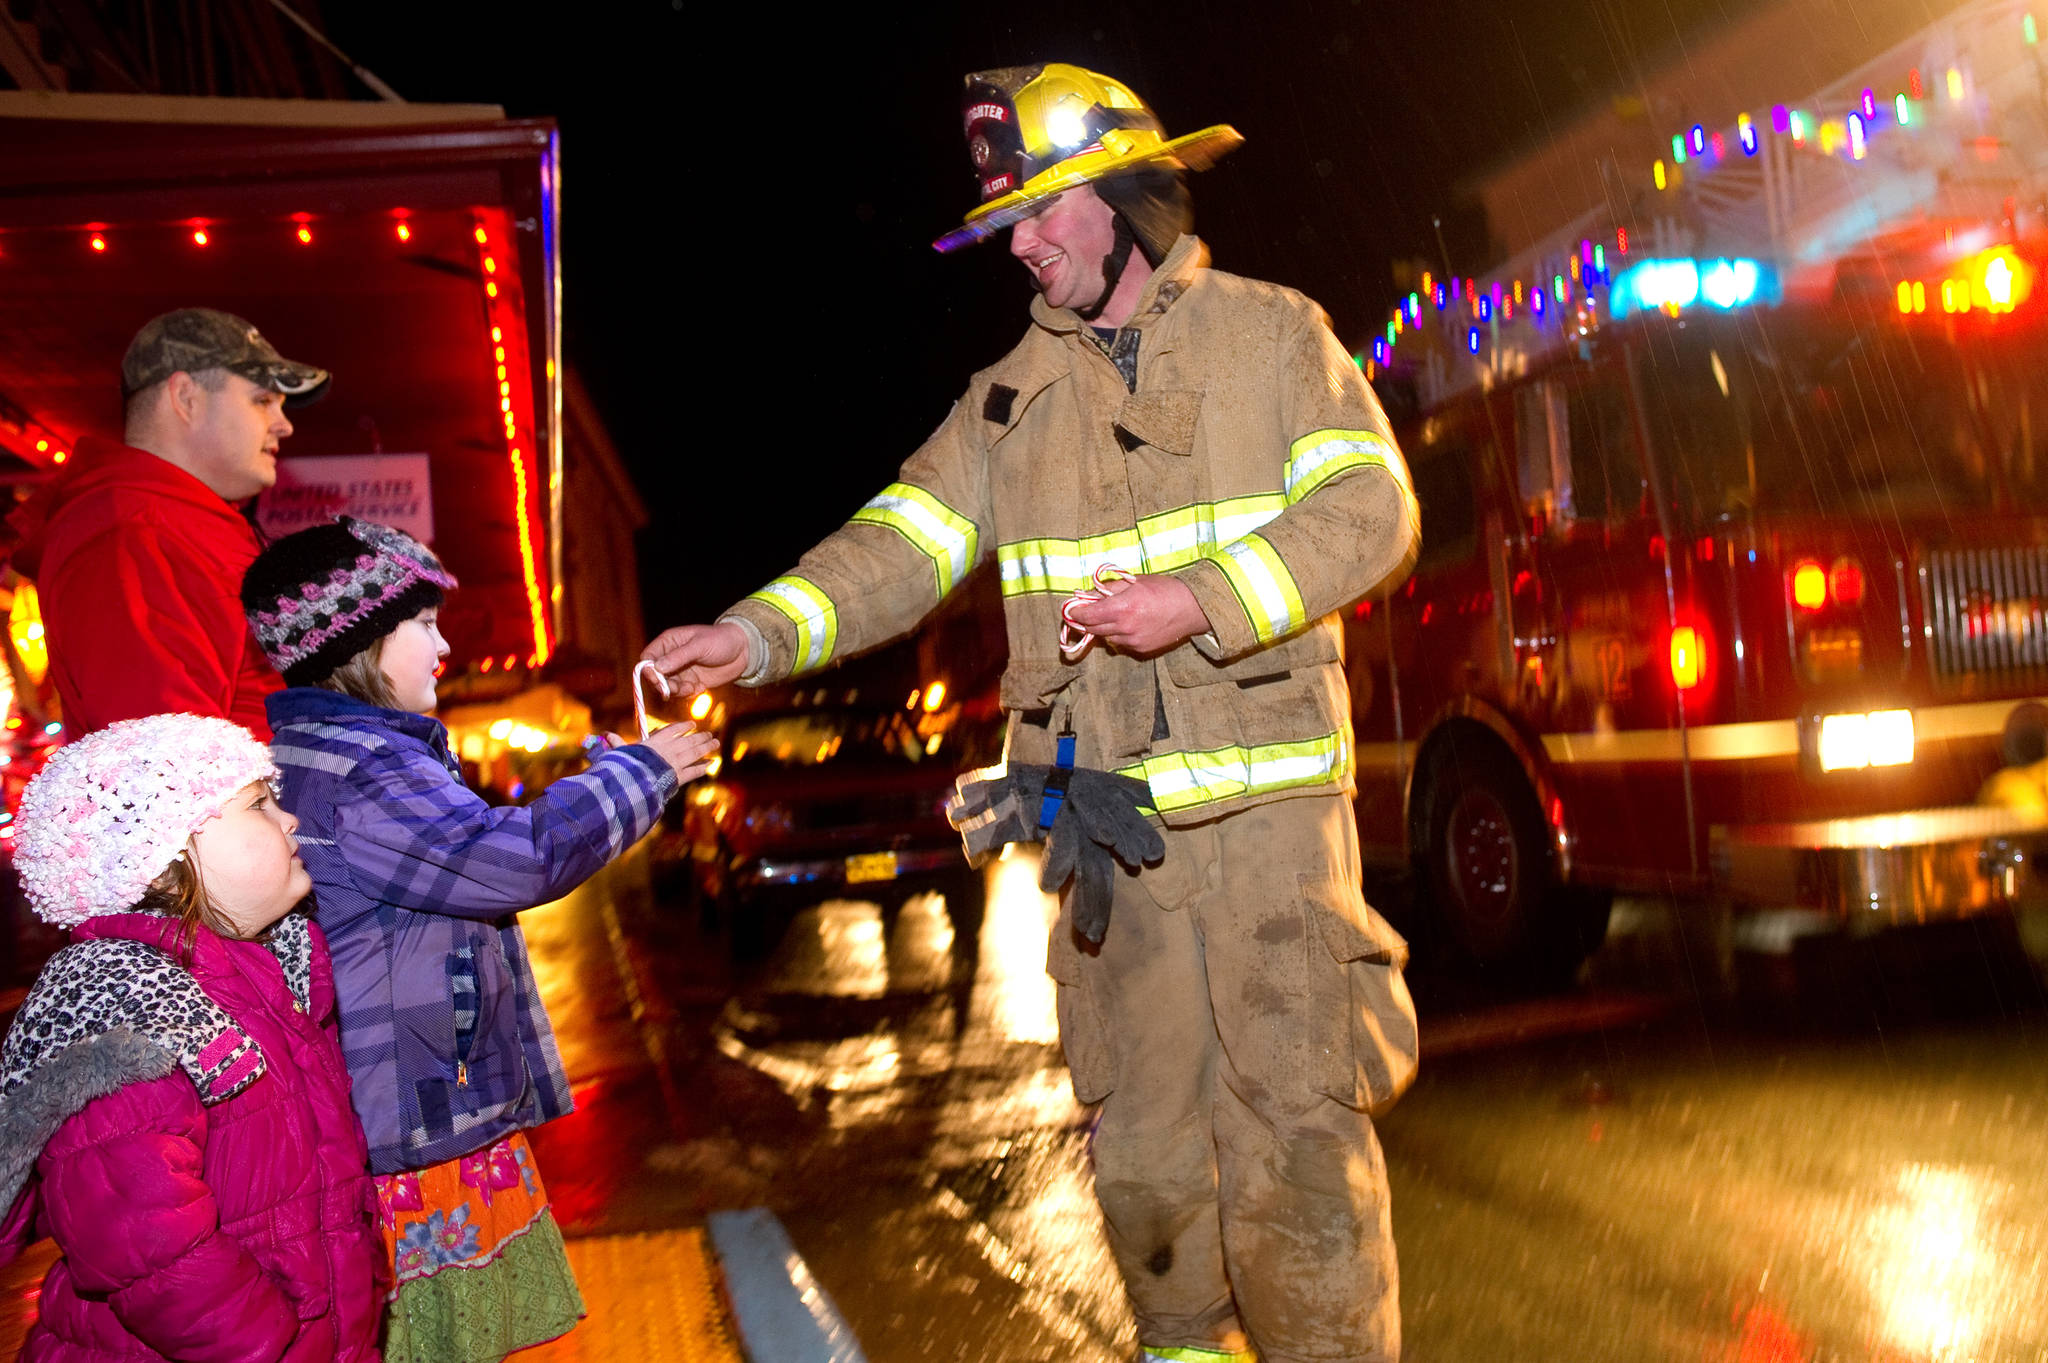 In this file photo, Capital City Fire and Rescue firefighter David Edmunds hands out candle canes to Joanna Magalotti, 6, and her sister, Joella, 3, as firemen make their way through town in December 2012 as part of their annual “Santa on a Fire Truck” event in Juneau and Douglas. (Michael Penn | Juneau Empire)